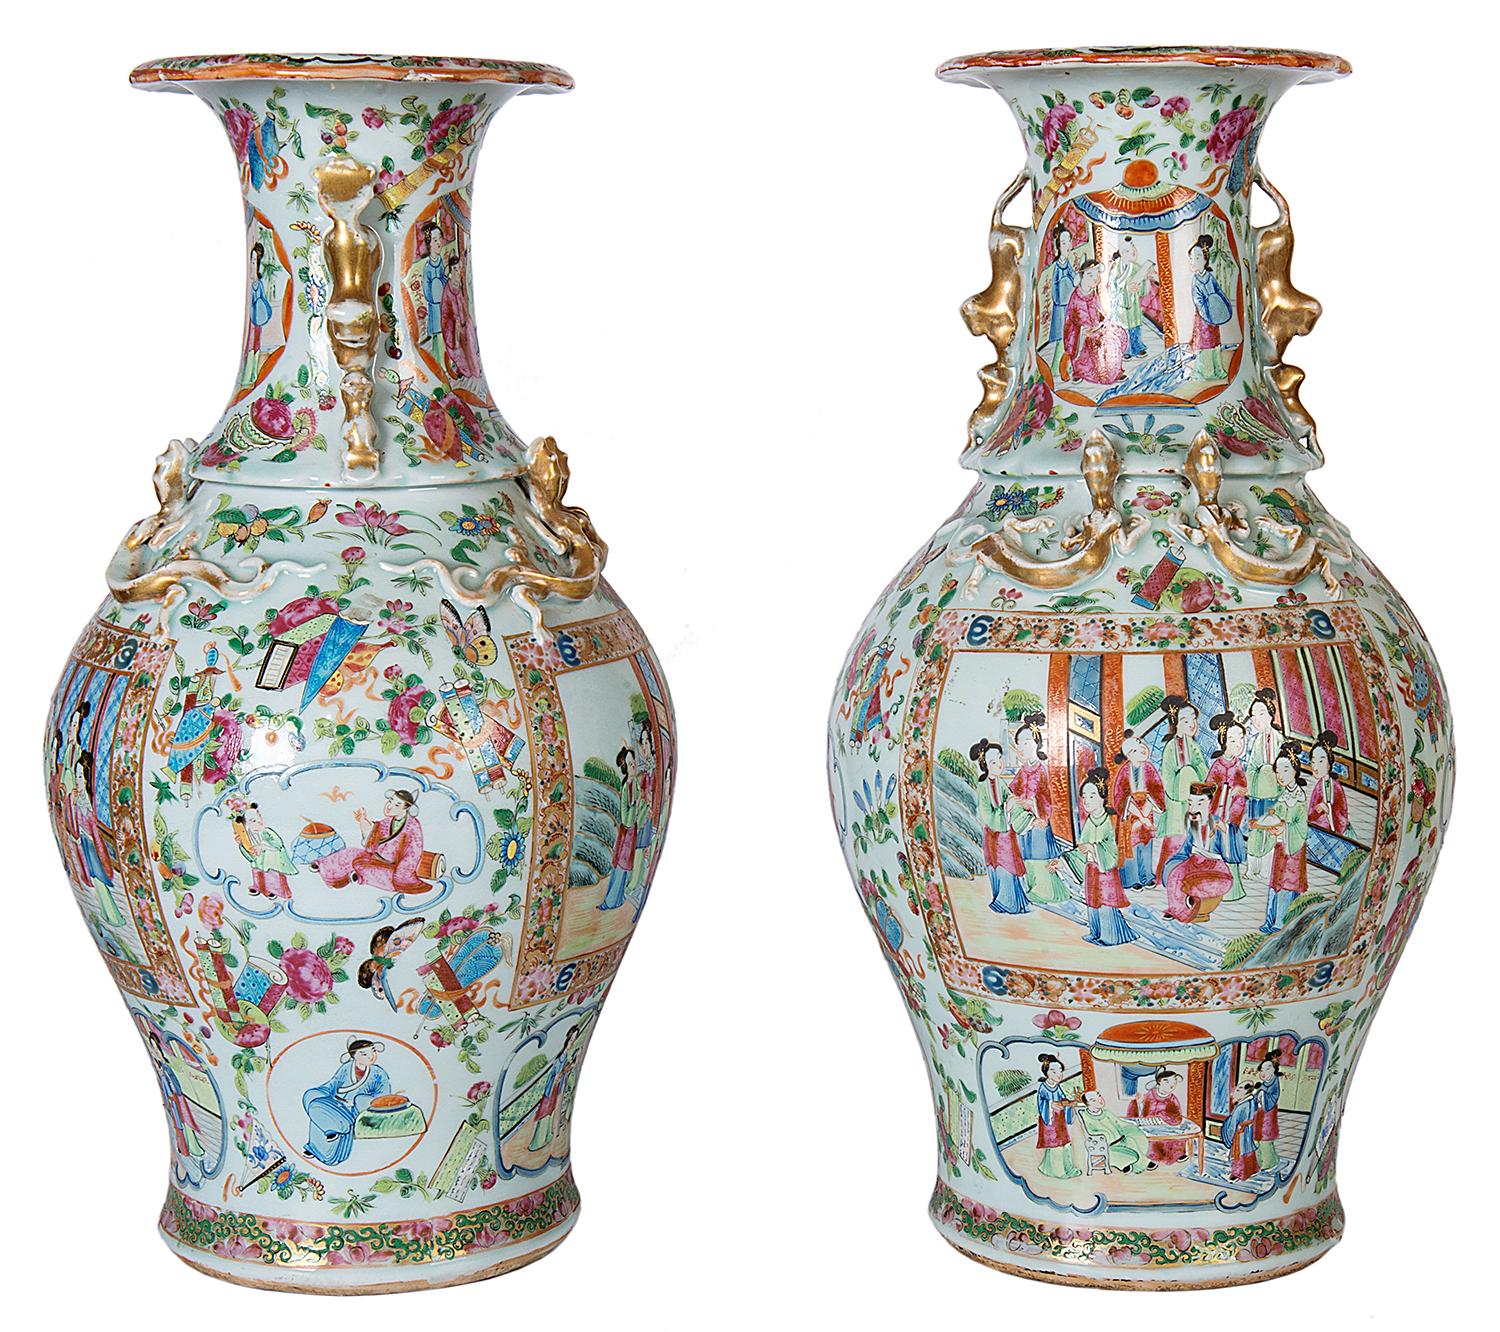 A good quality pair of 19th century Chinese canton / rose medallion vases, each with gilded dog of faux and serpents. Panels depicting classical Chinese interior scenes of people in traditional dress.
We can have this pair of vases converted to